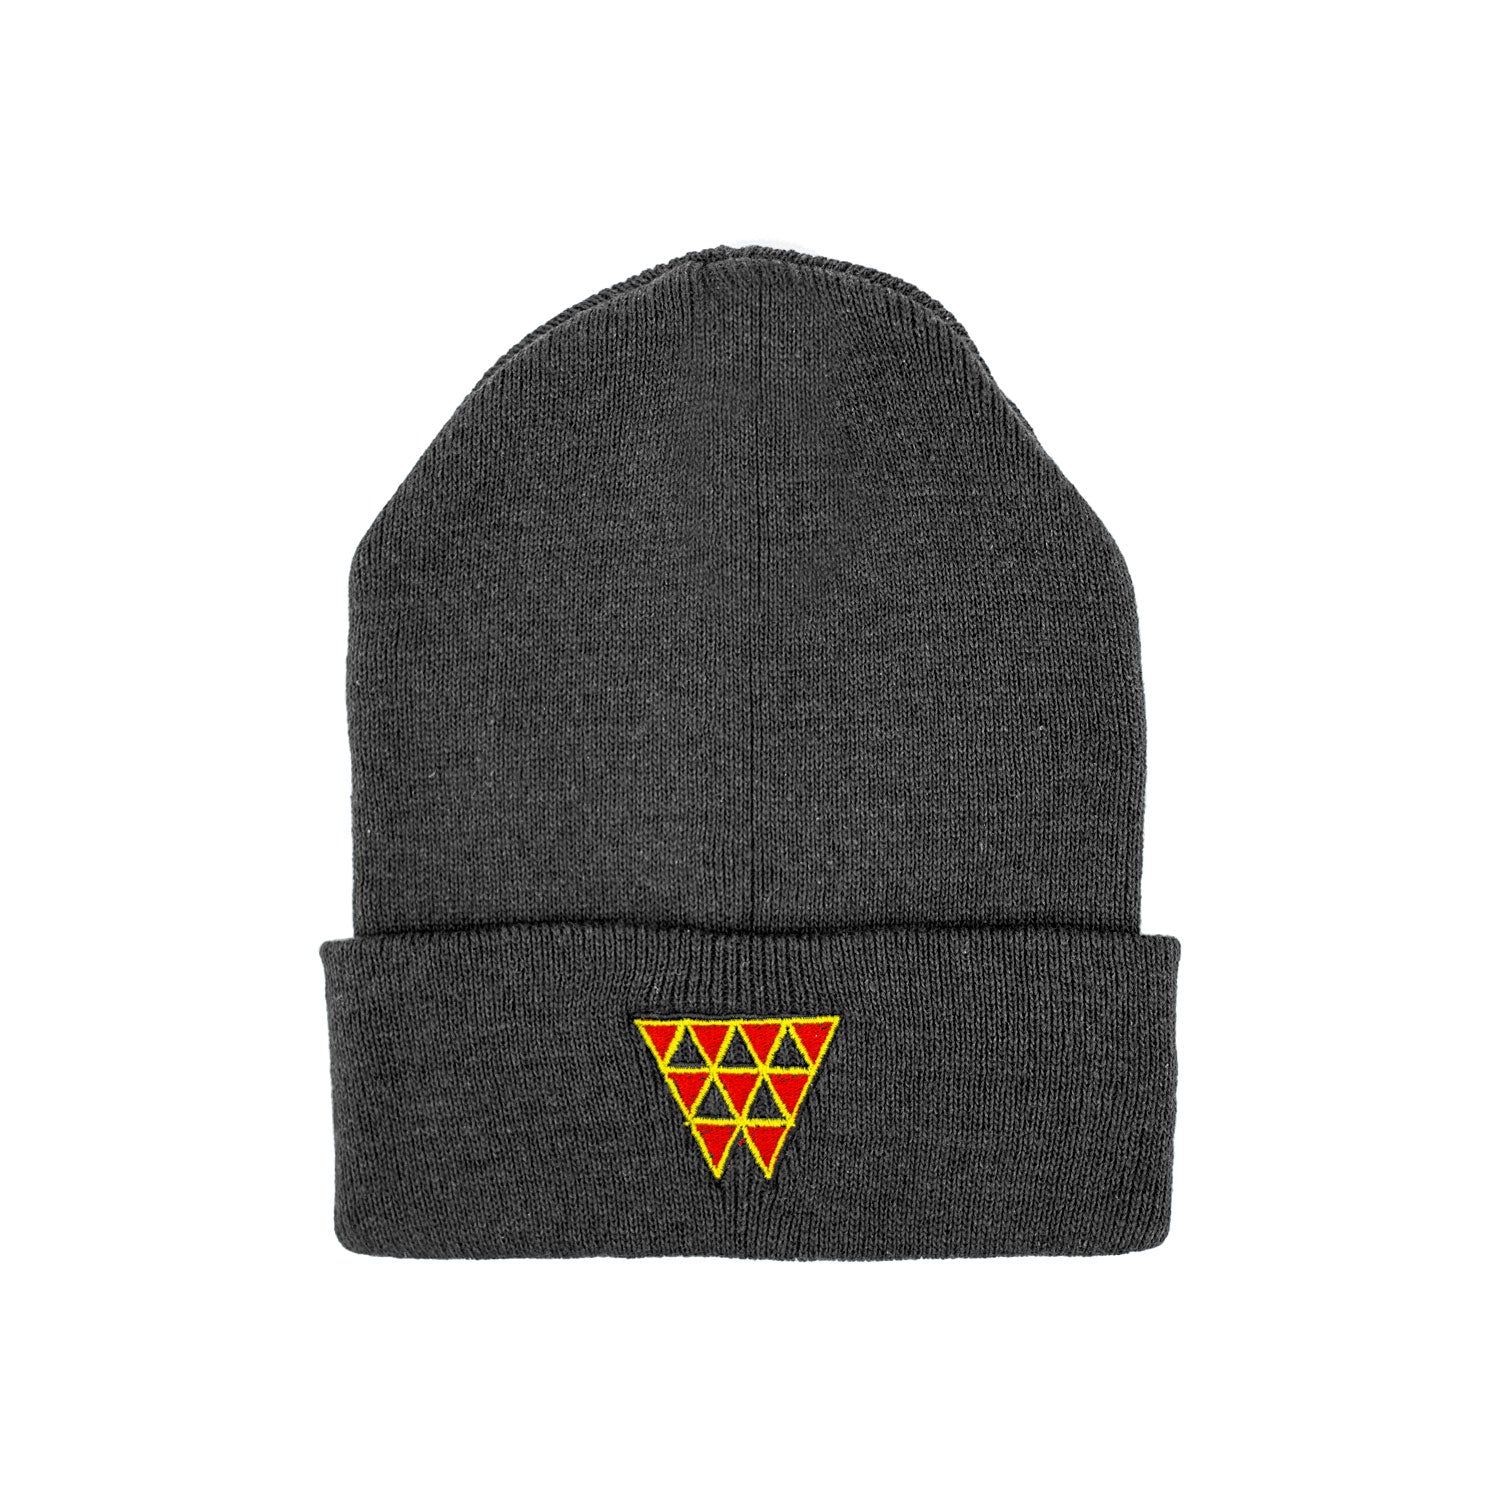 Red Triangle Knitted Cuff Beanie - Gray